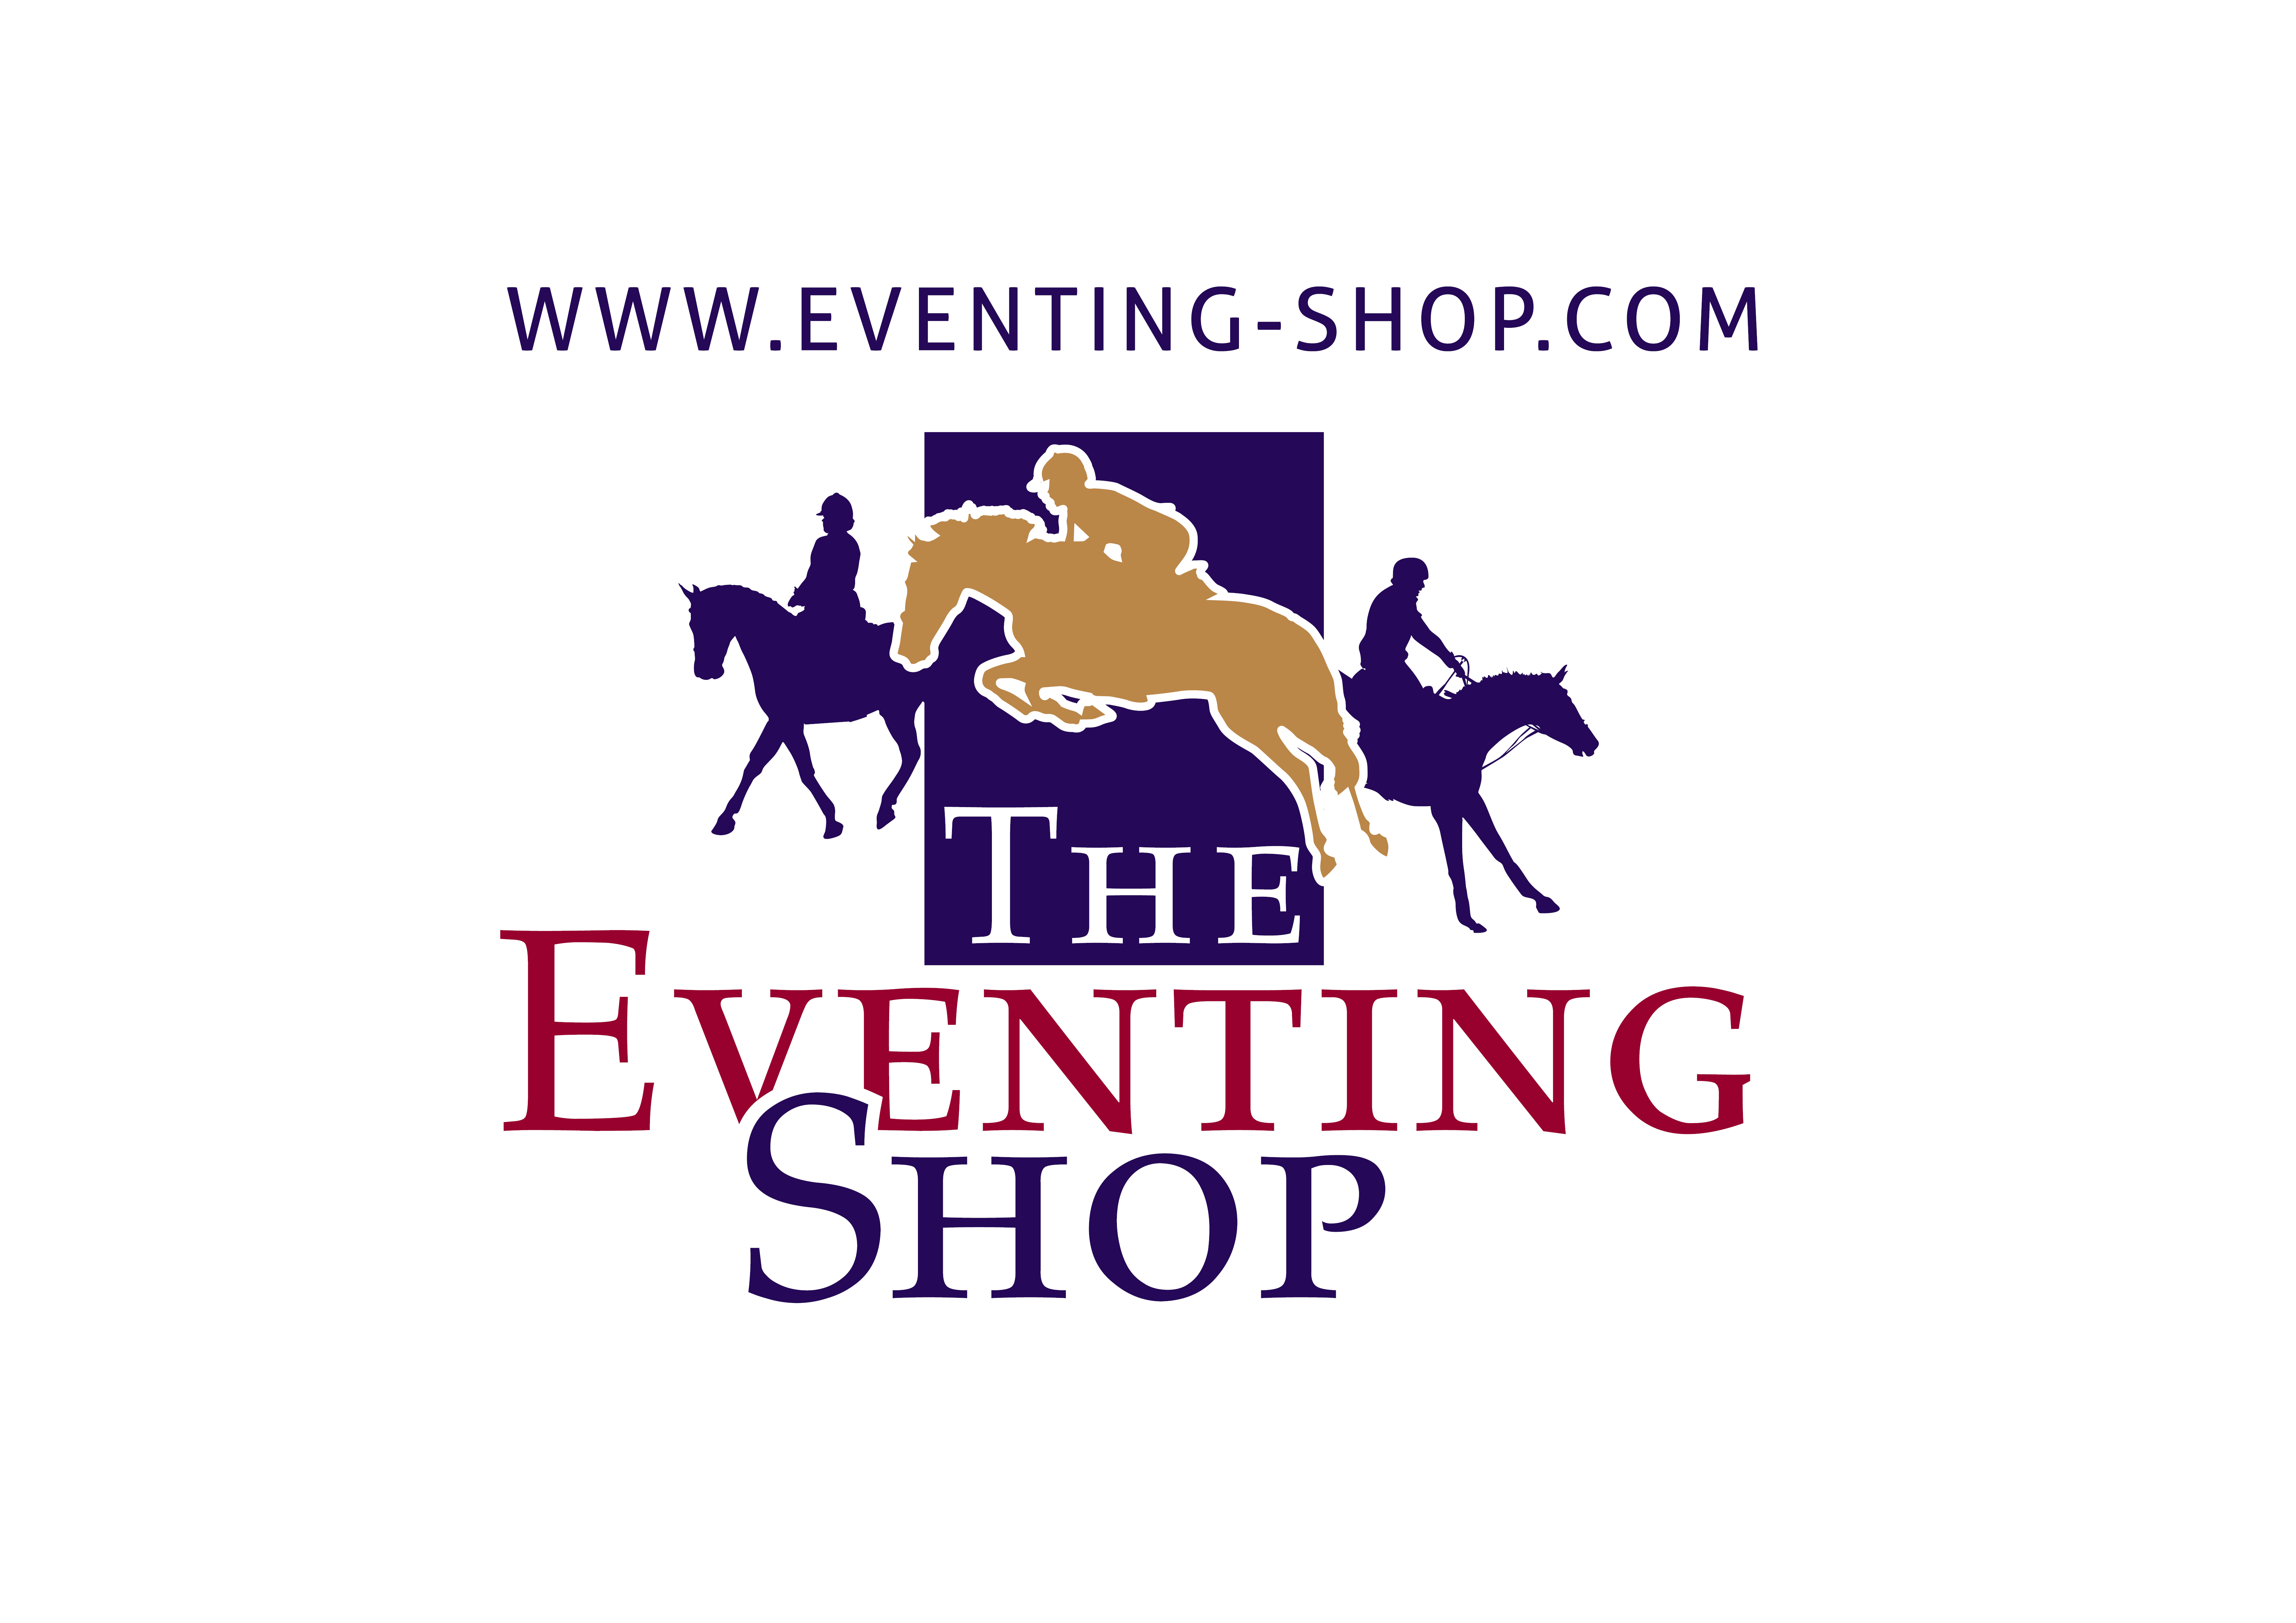 The Eventing Shop